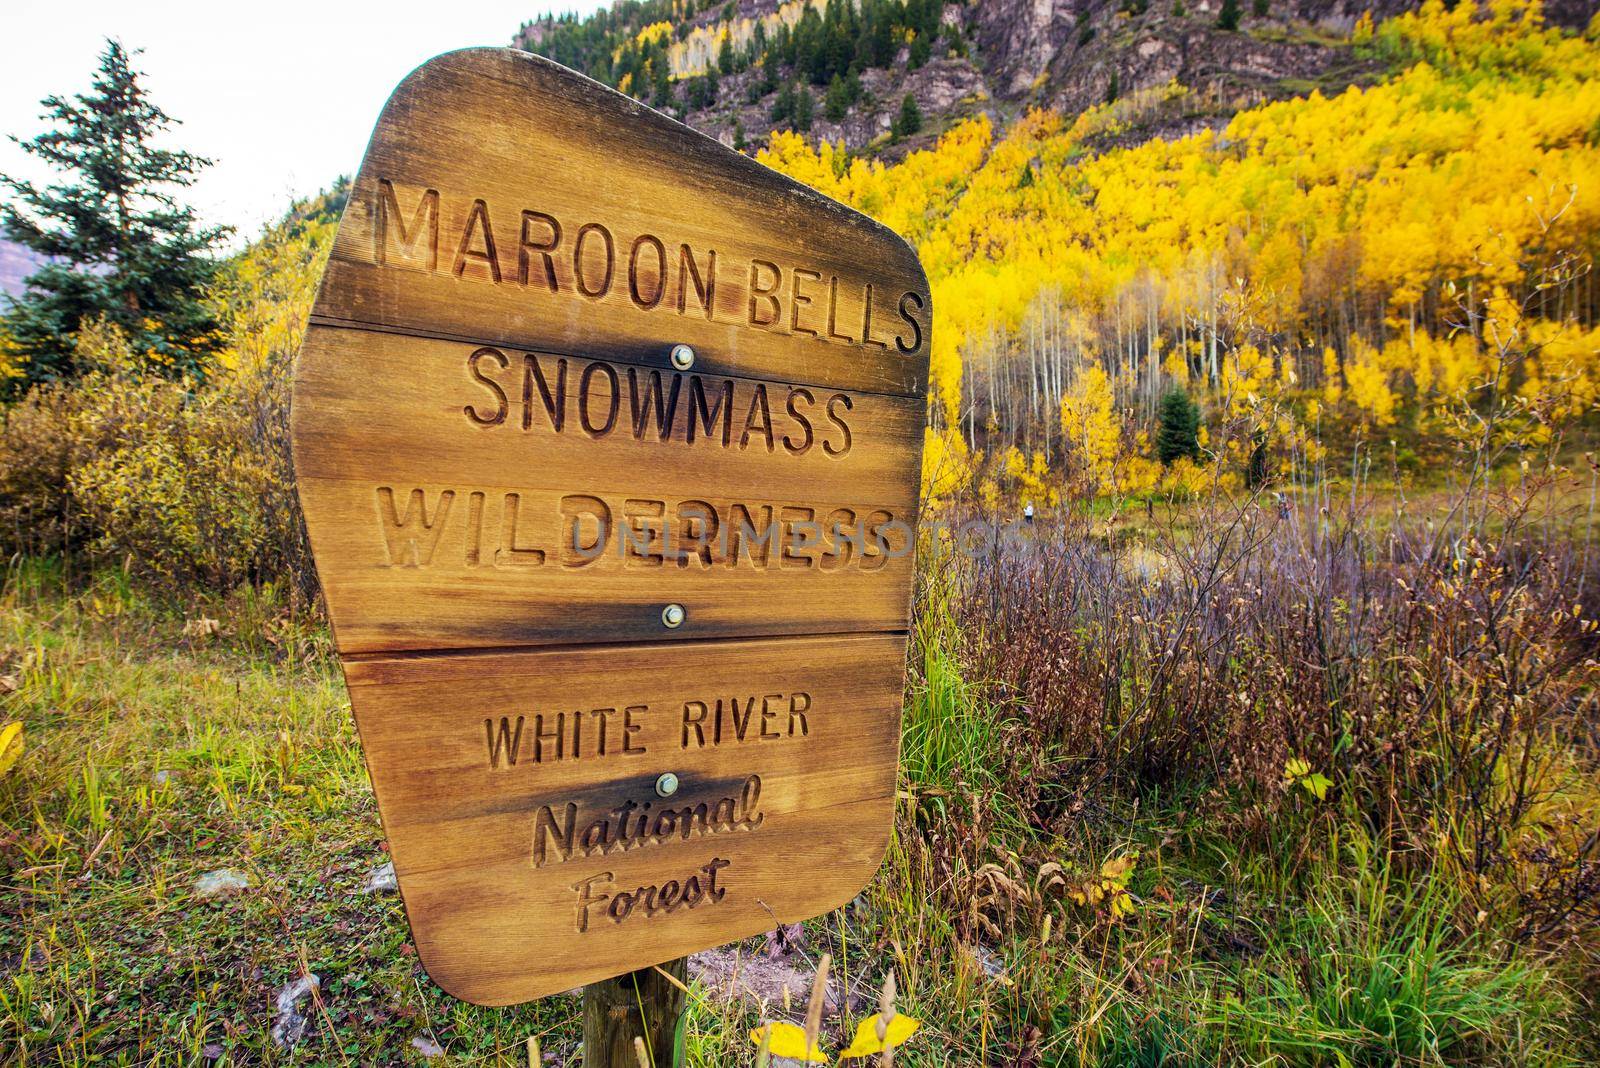 Maroon Bells Snowmass Wilderness - White River National Forest Wooden Sign near Maroon Bells, Aspen, Colorado, United States. by welcomia